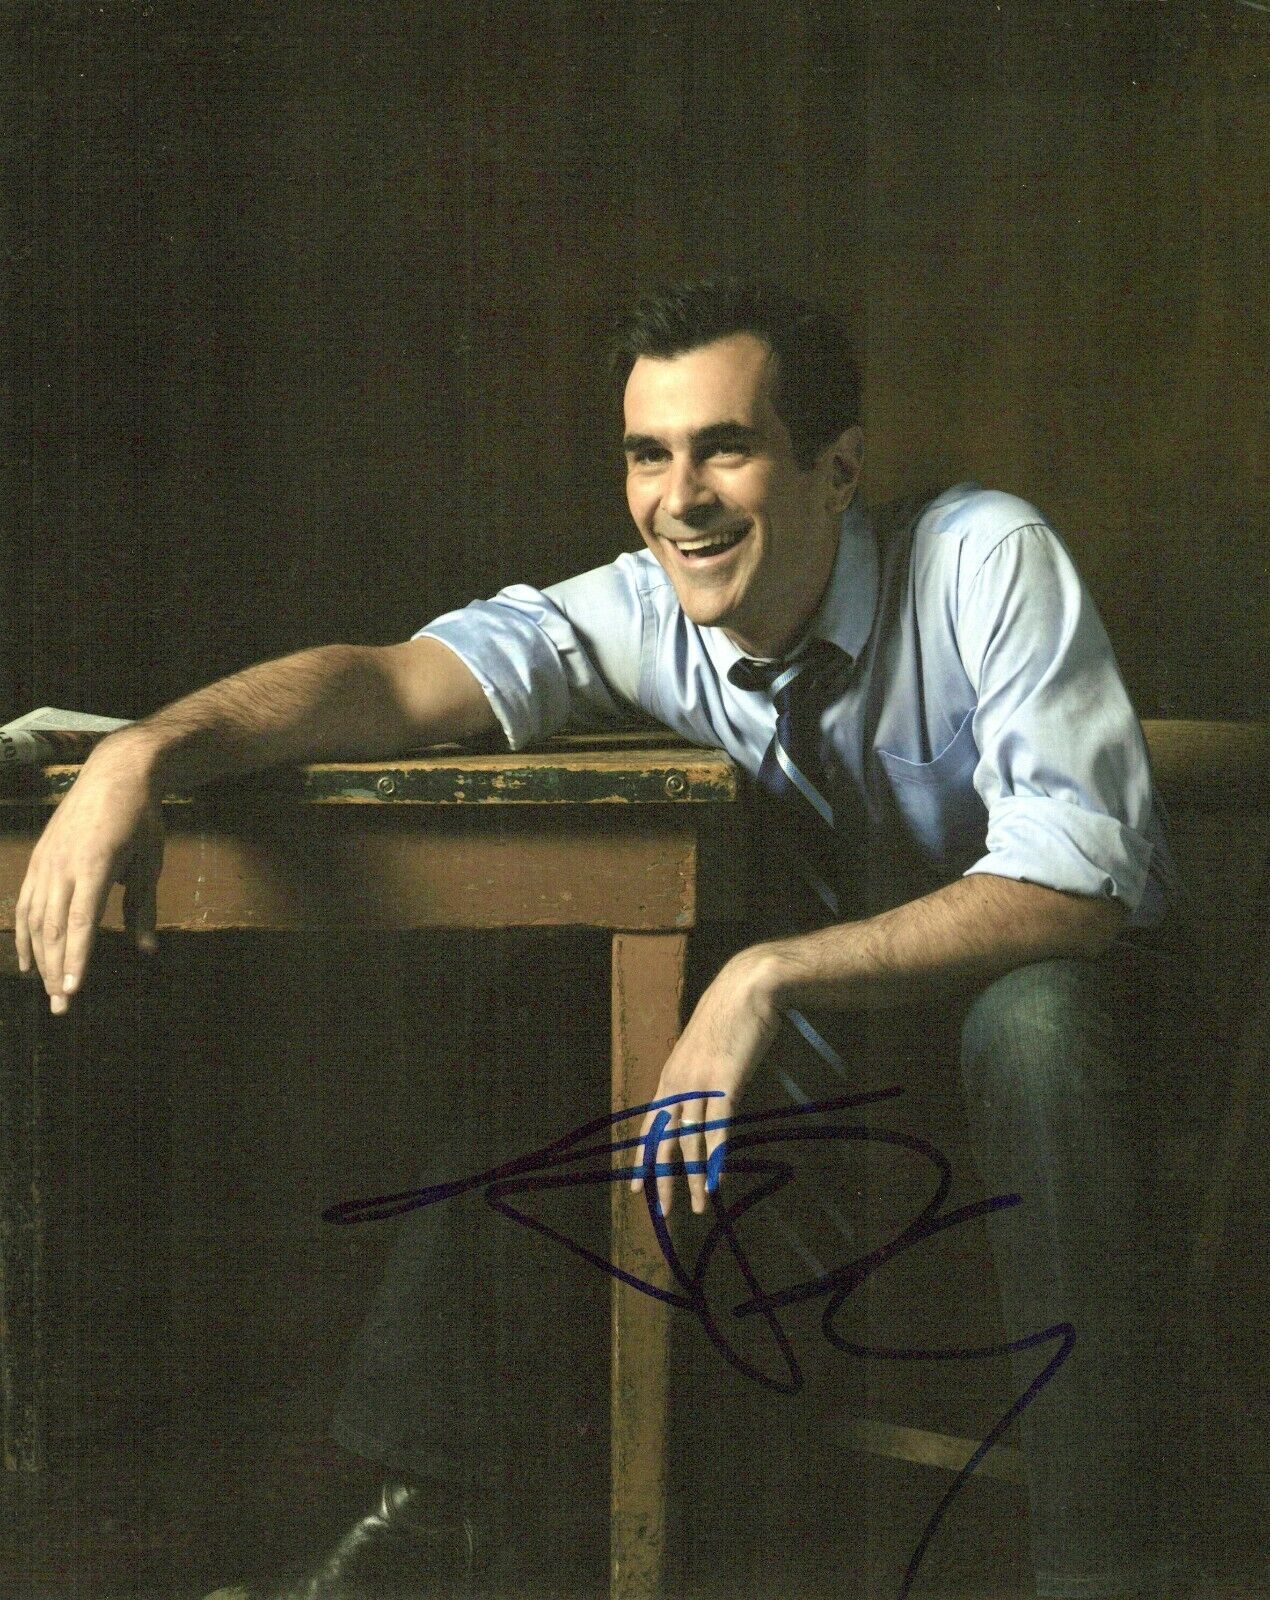 Ty Burrell head shot autographed Photo Poster painting signed 8x10 #1